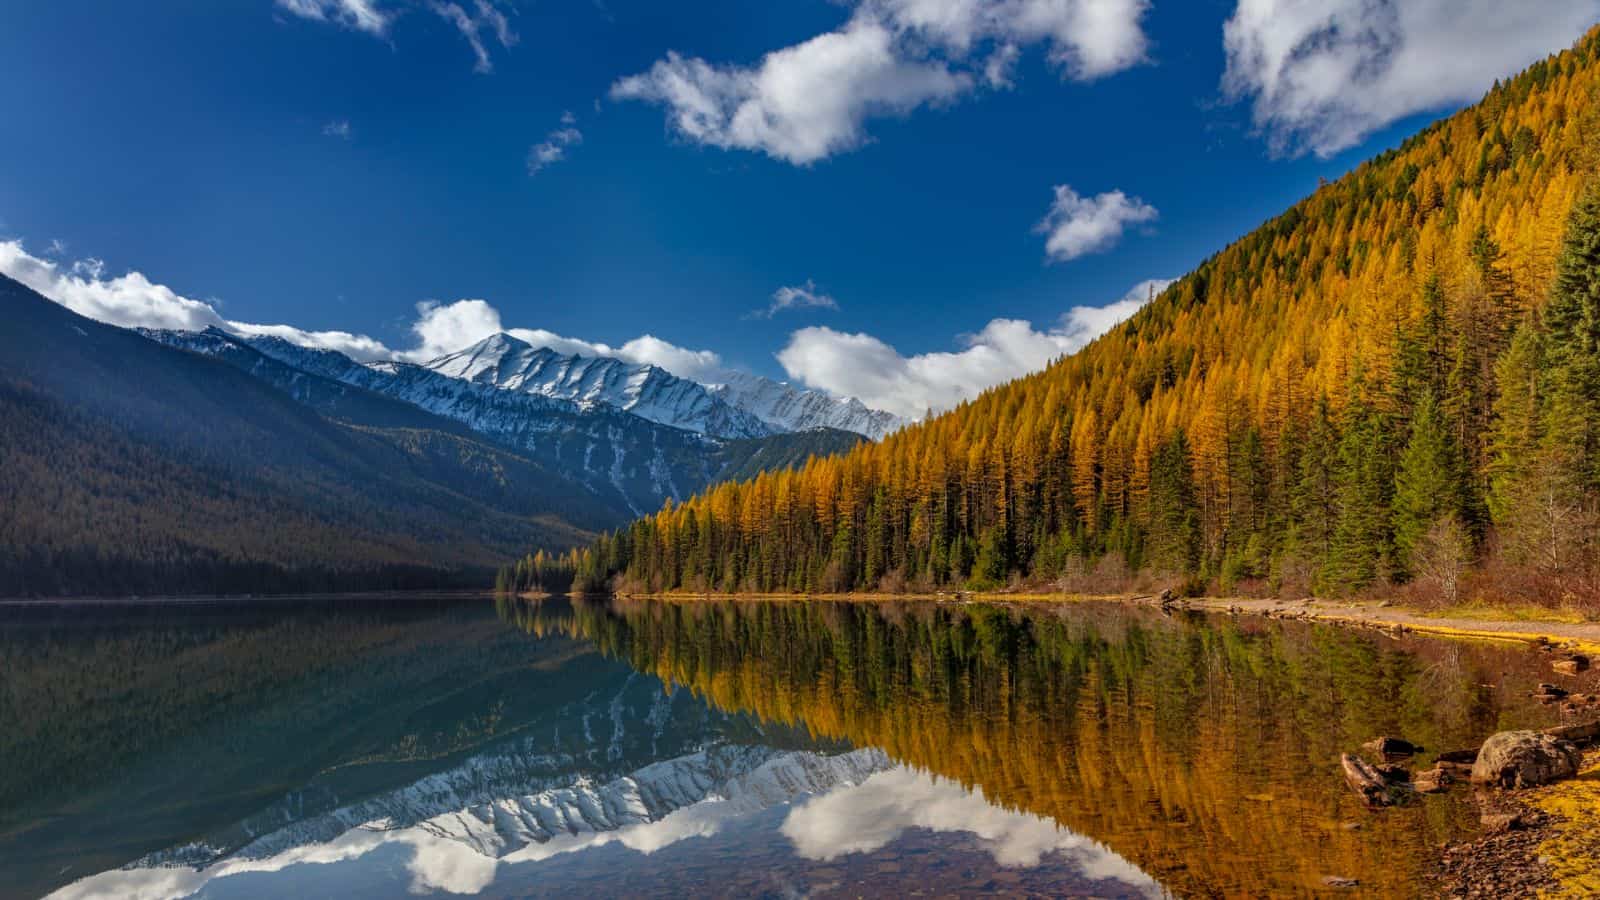 <p>Experience the beauty of Montana on The Great Northern, which offers views of Glacier National Park, Flathead Lake, and the Northern Rocky Mountains.</p><p>This 430-mile route takes you through some of Montana’s most stunning landscapes, including the Going-to-the-Sun Road in Glacier National Park, the quaint town of Whitefish, and the scenic shores of Flathead Lake.</p><p>Spot wildlife such as grizzly bears and elk and enjoy outdoor activities such as fishing, boating, and wildlife viewing. The Great Northern is best embarked on in the summer and early fall when the wildflowers are in bloom, creating a colorful landscape.</p>